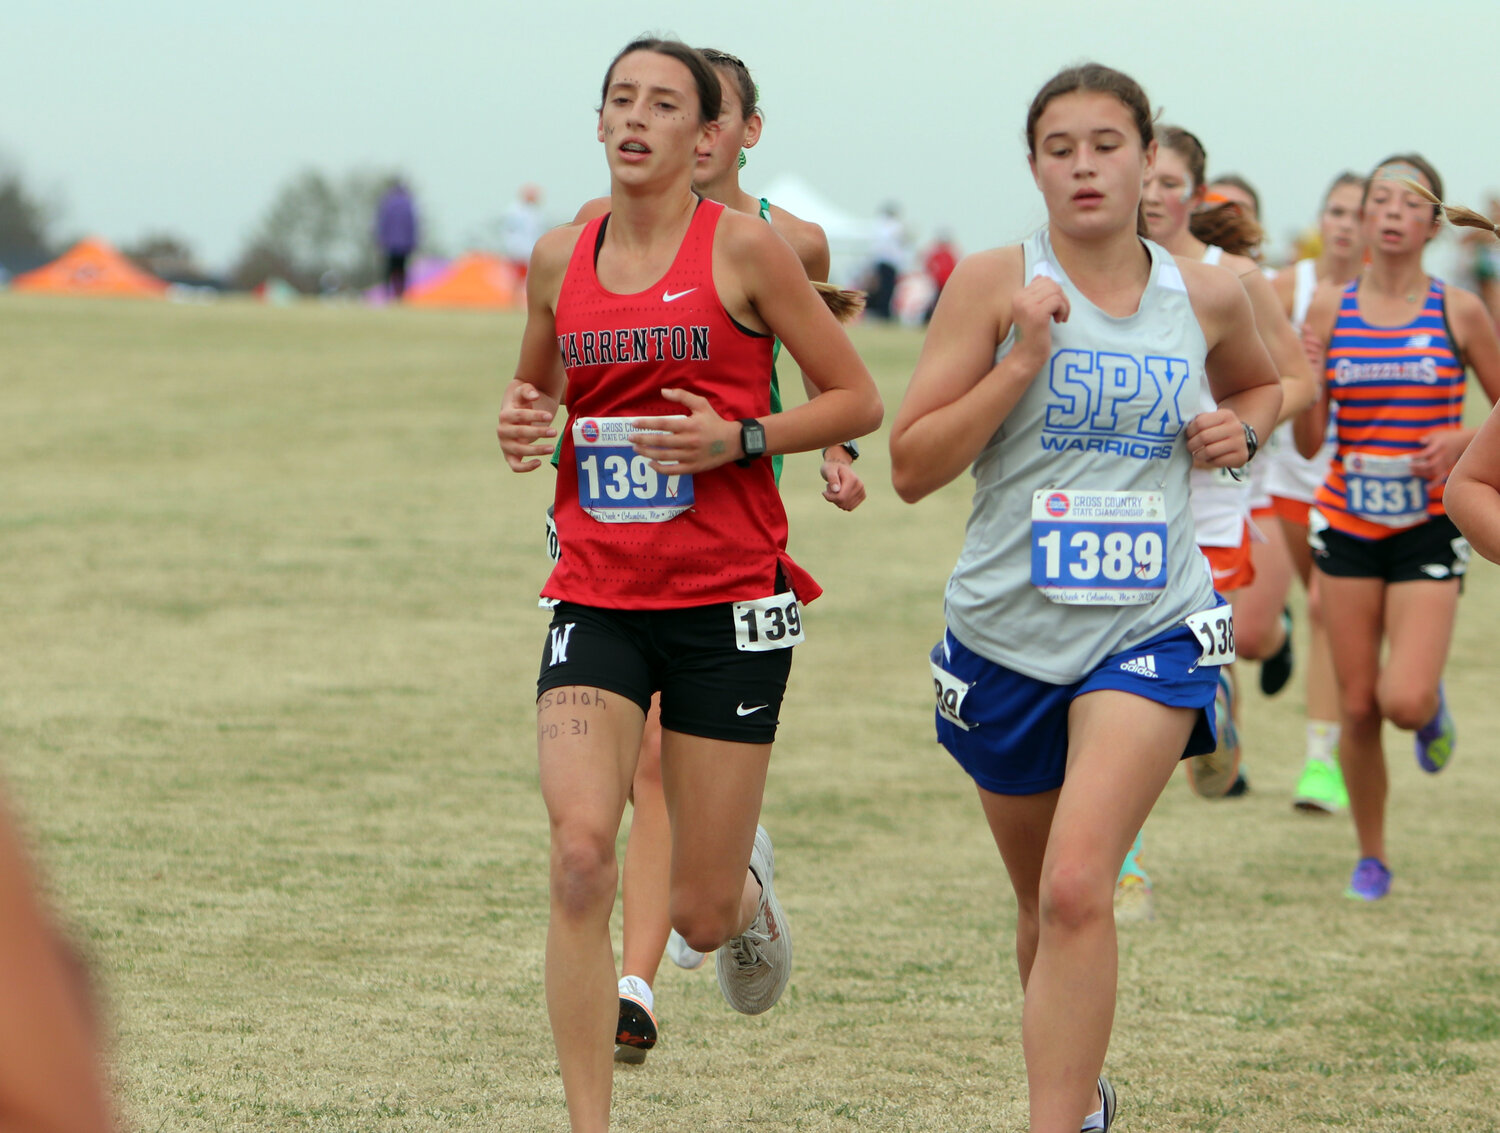 Alexis Ruff competes at the Missouri Cross Country State Championships last week in Columbia.